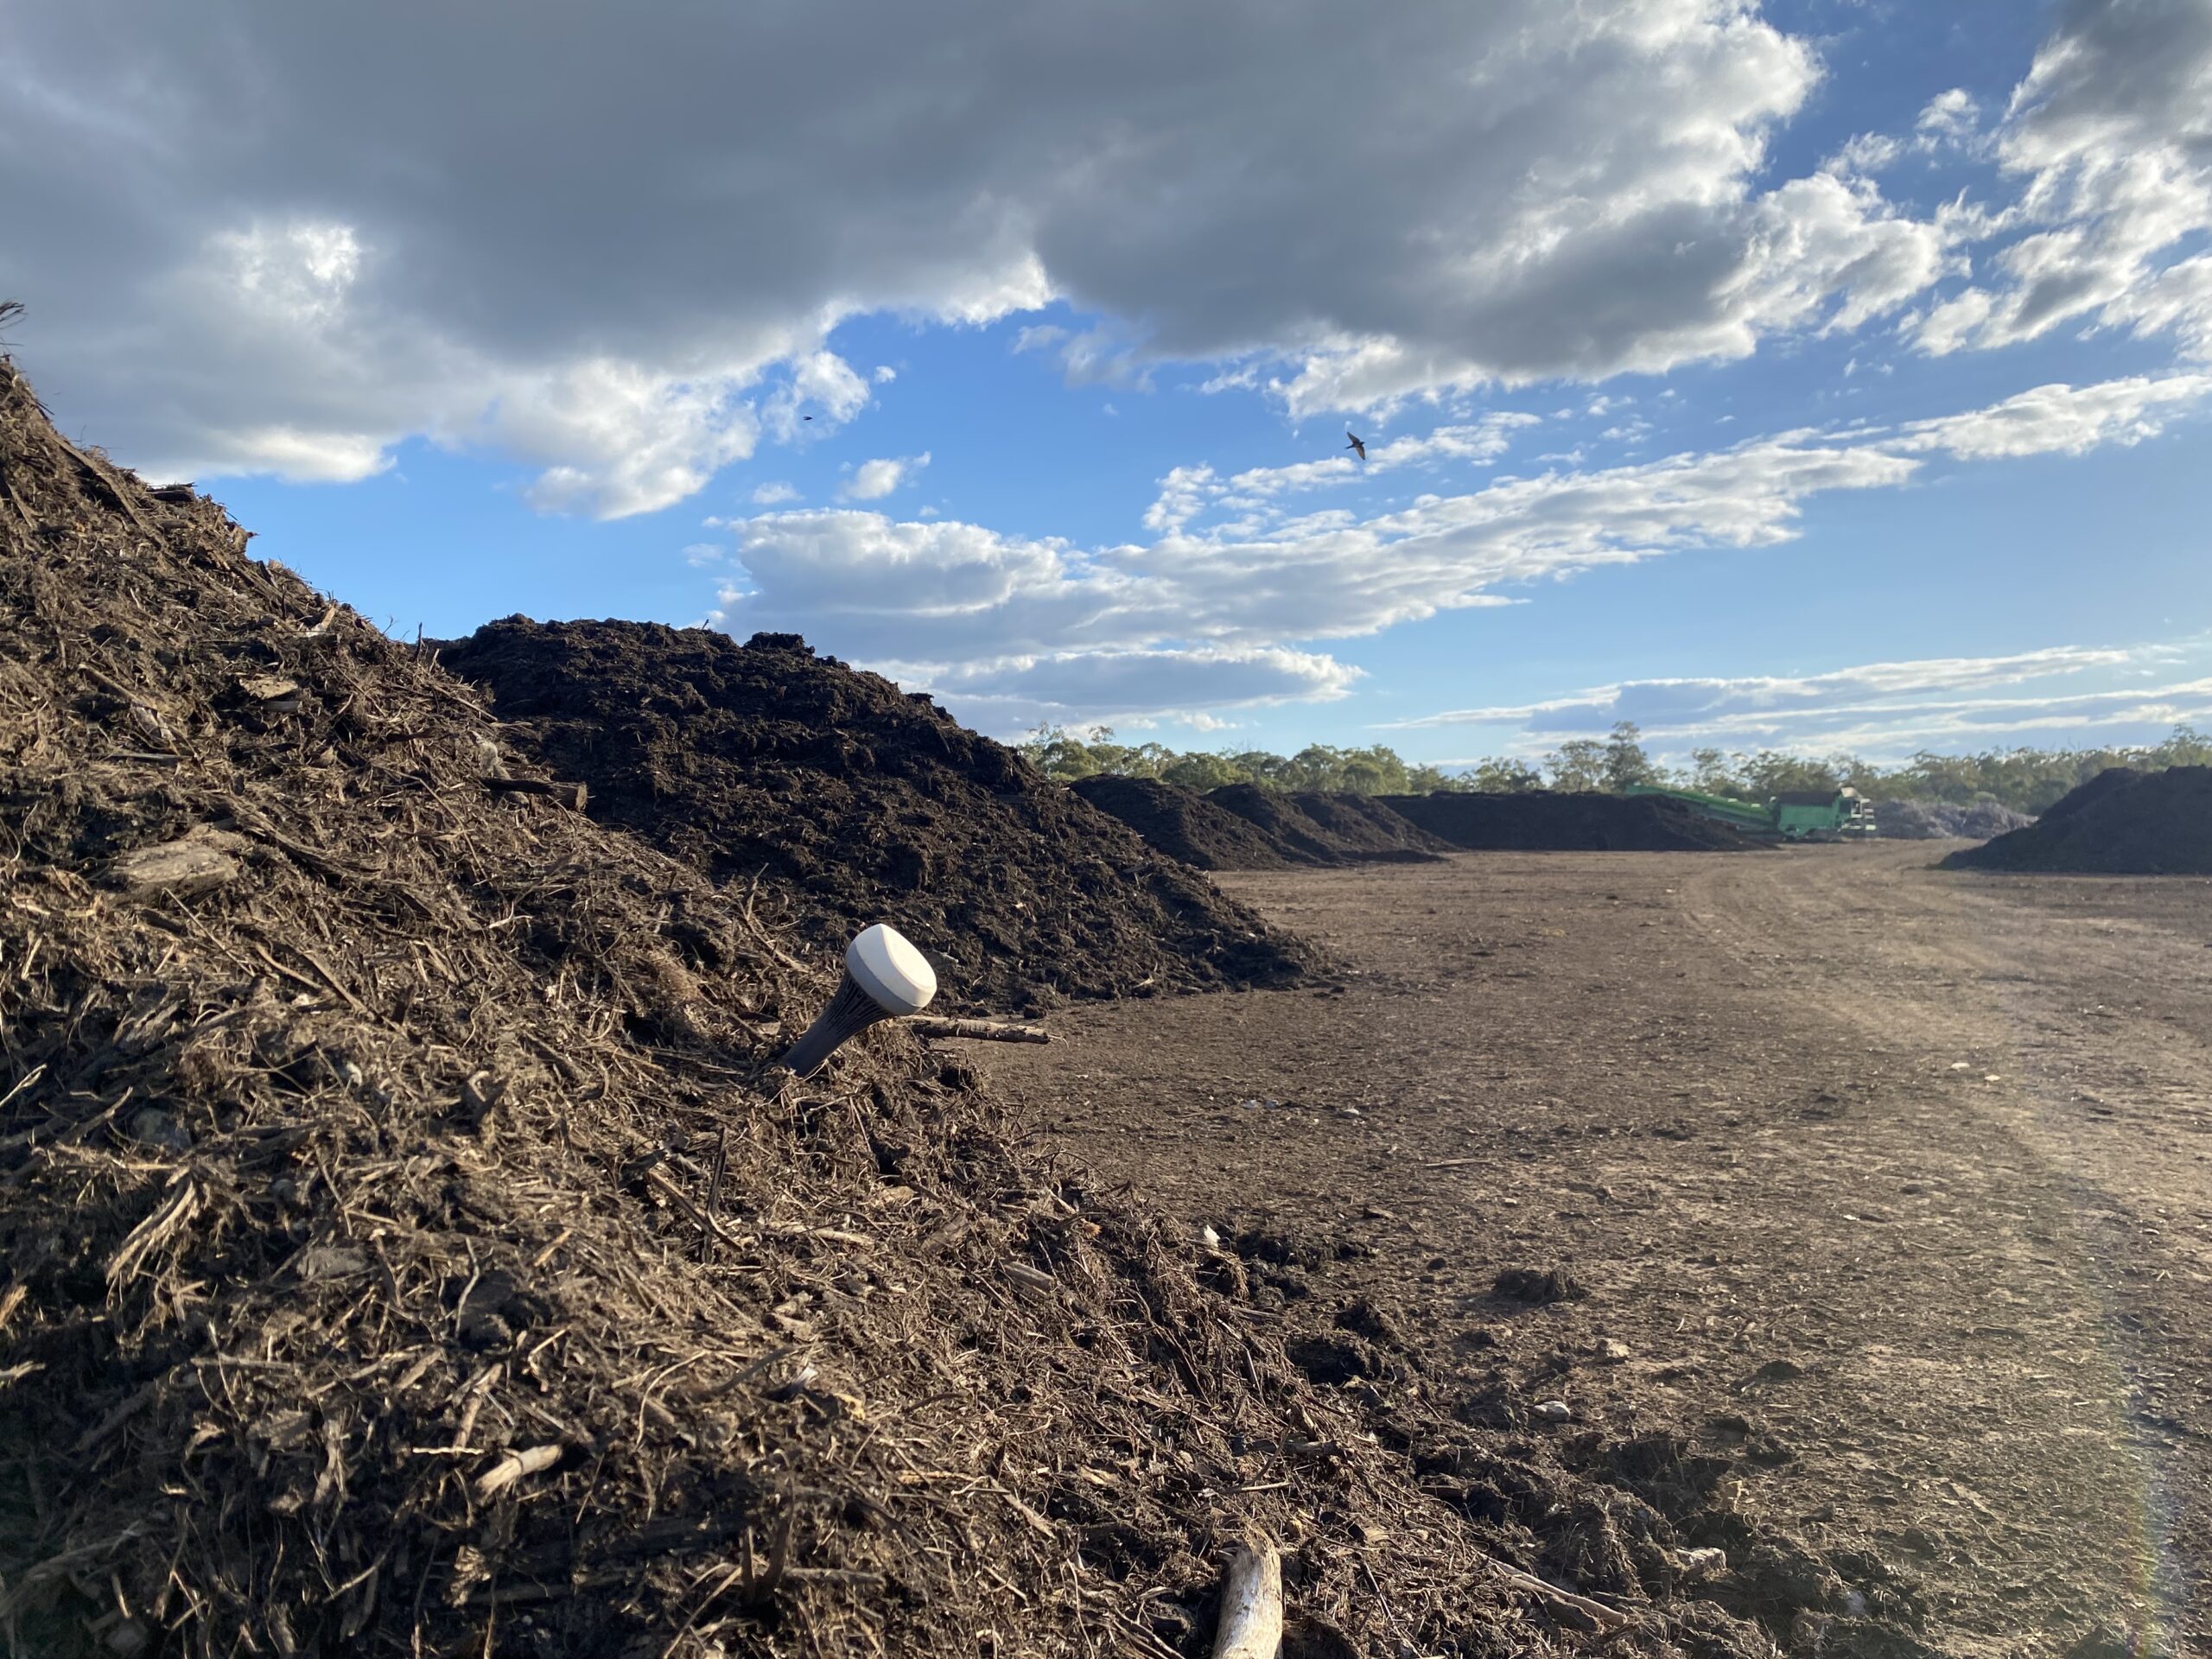 Monty Compost Co partners with NuGrow for innovative project